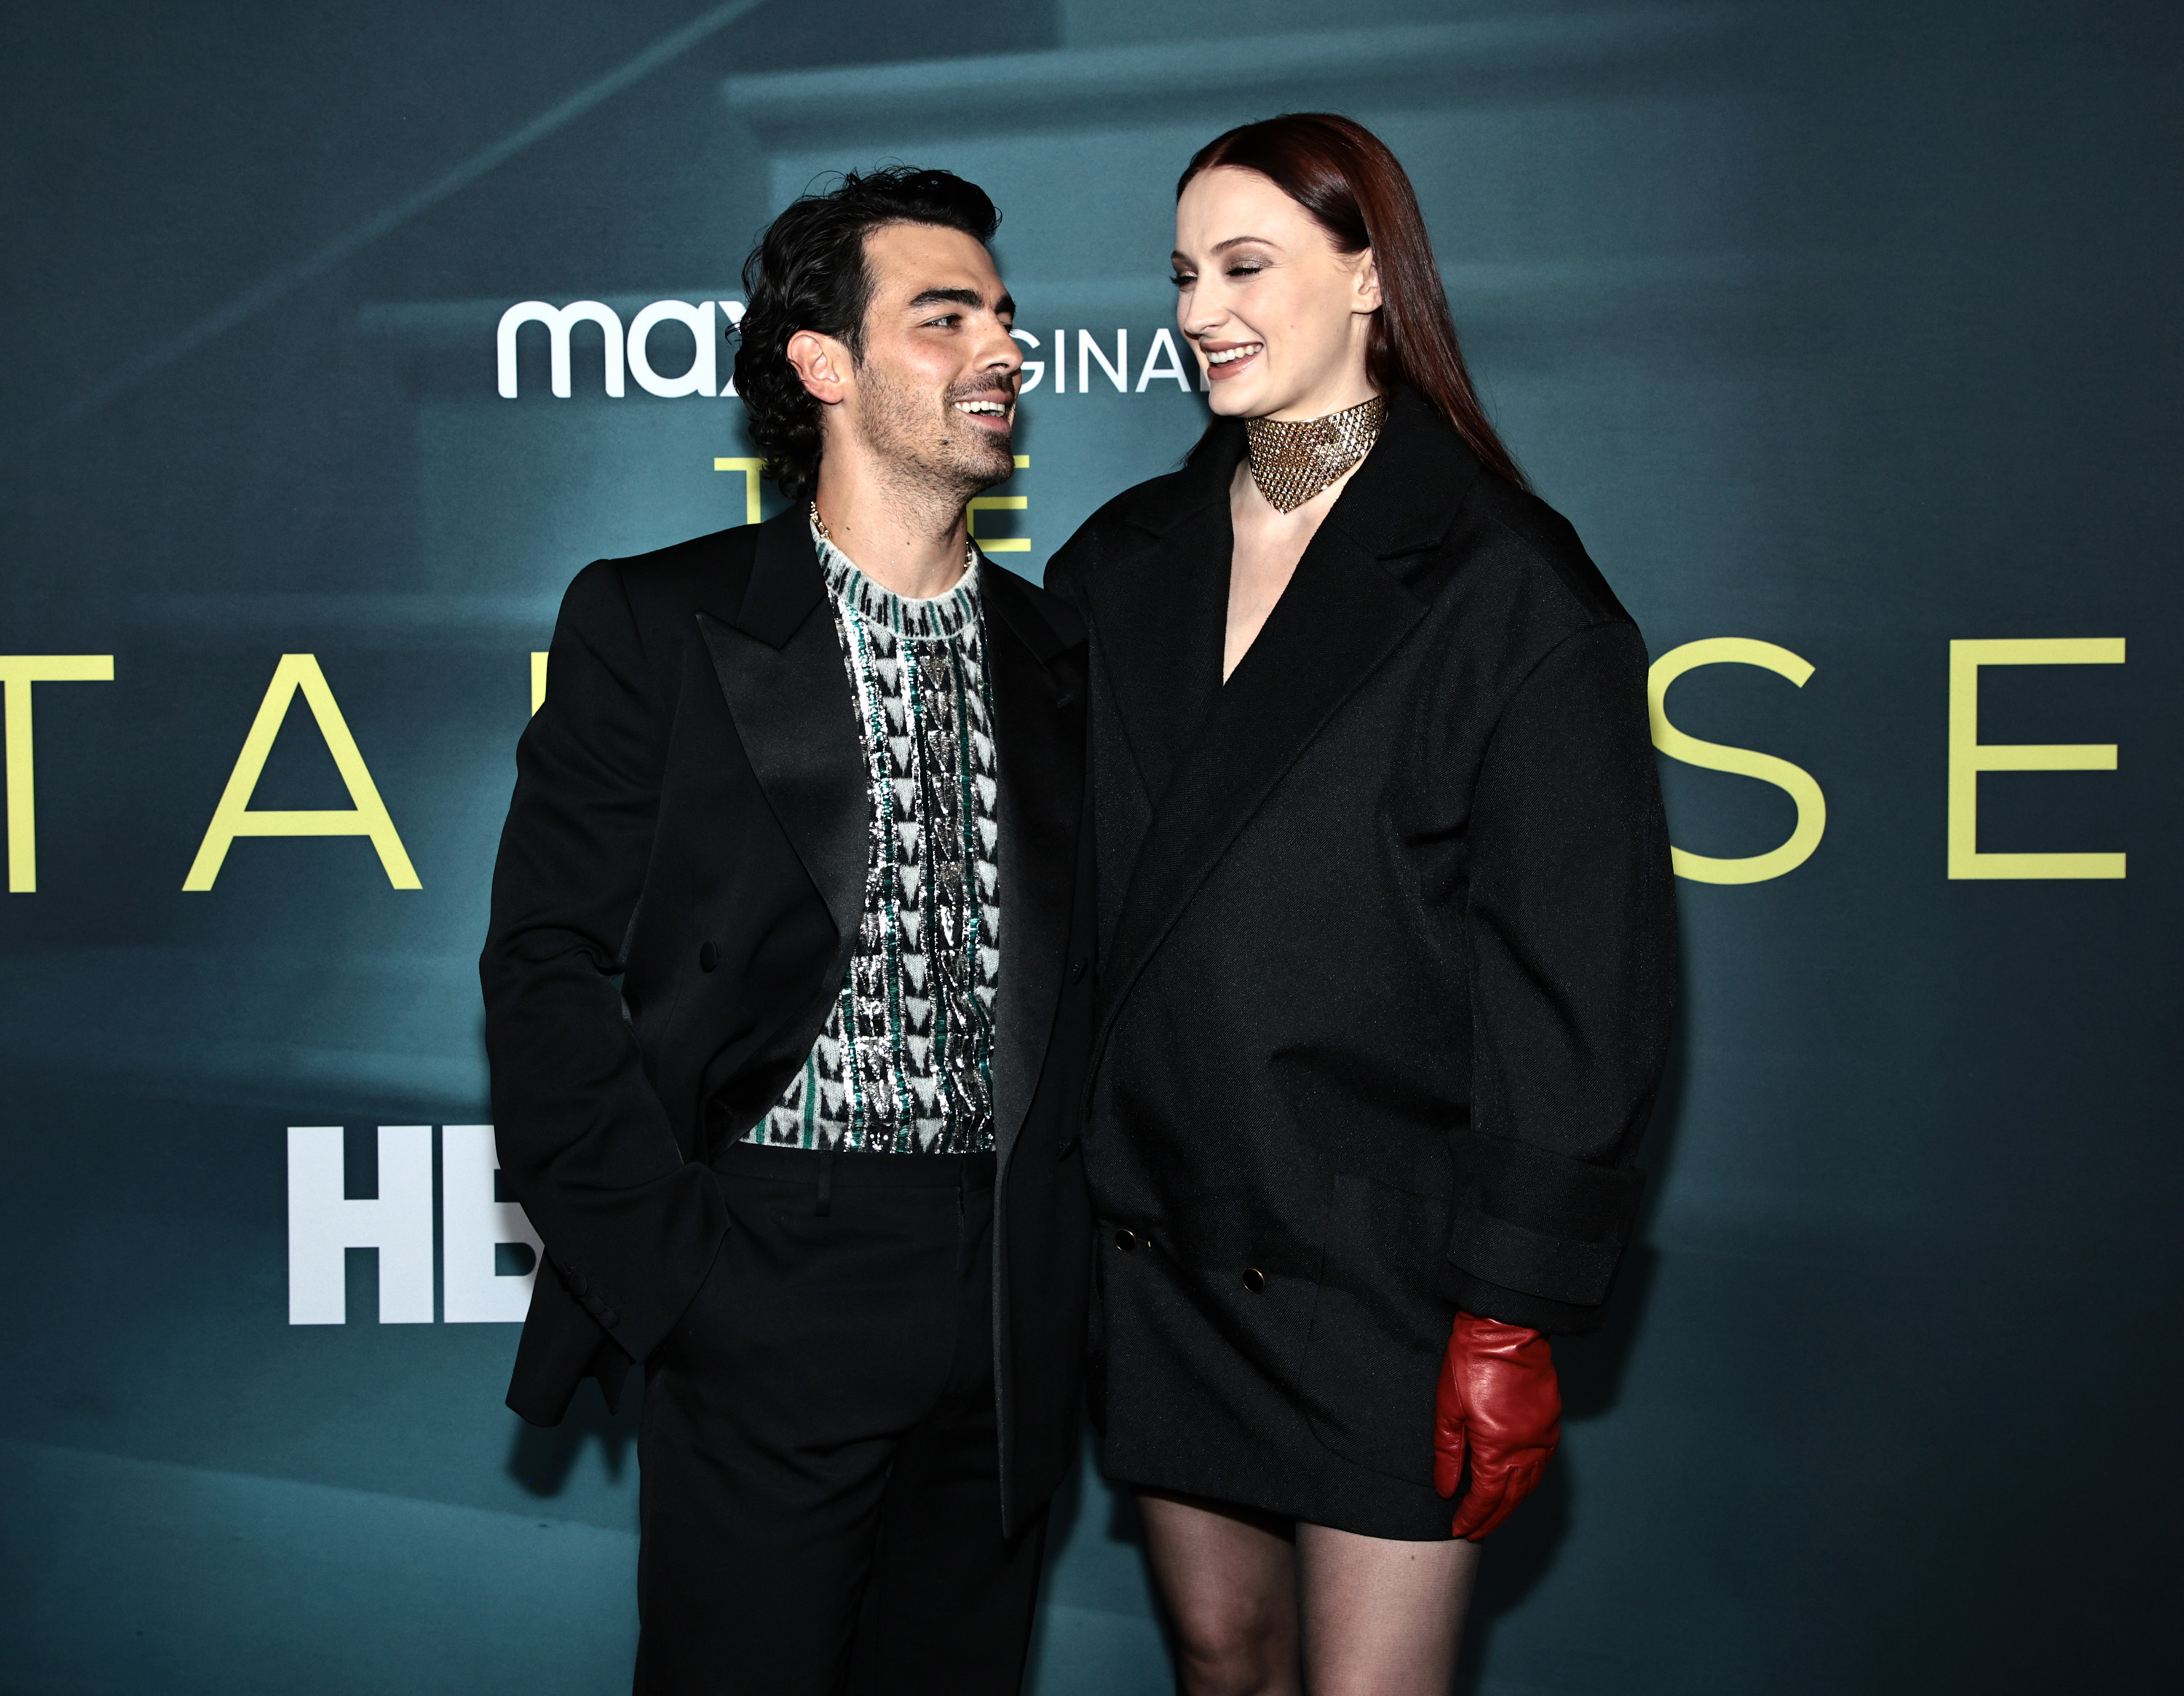 Joe Jonas and Sophie Turner looking at each other as they stand on the red carpet at a premiere event